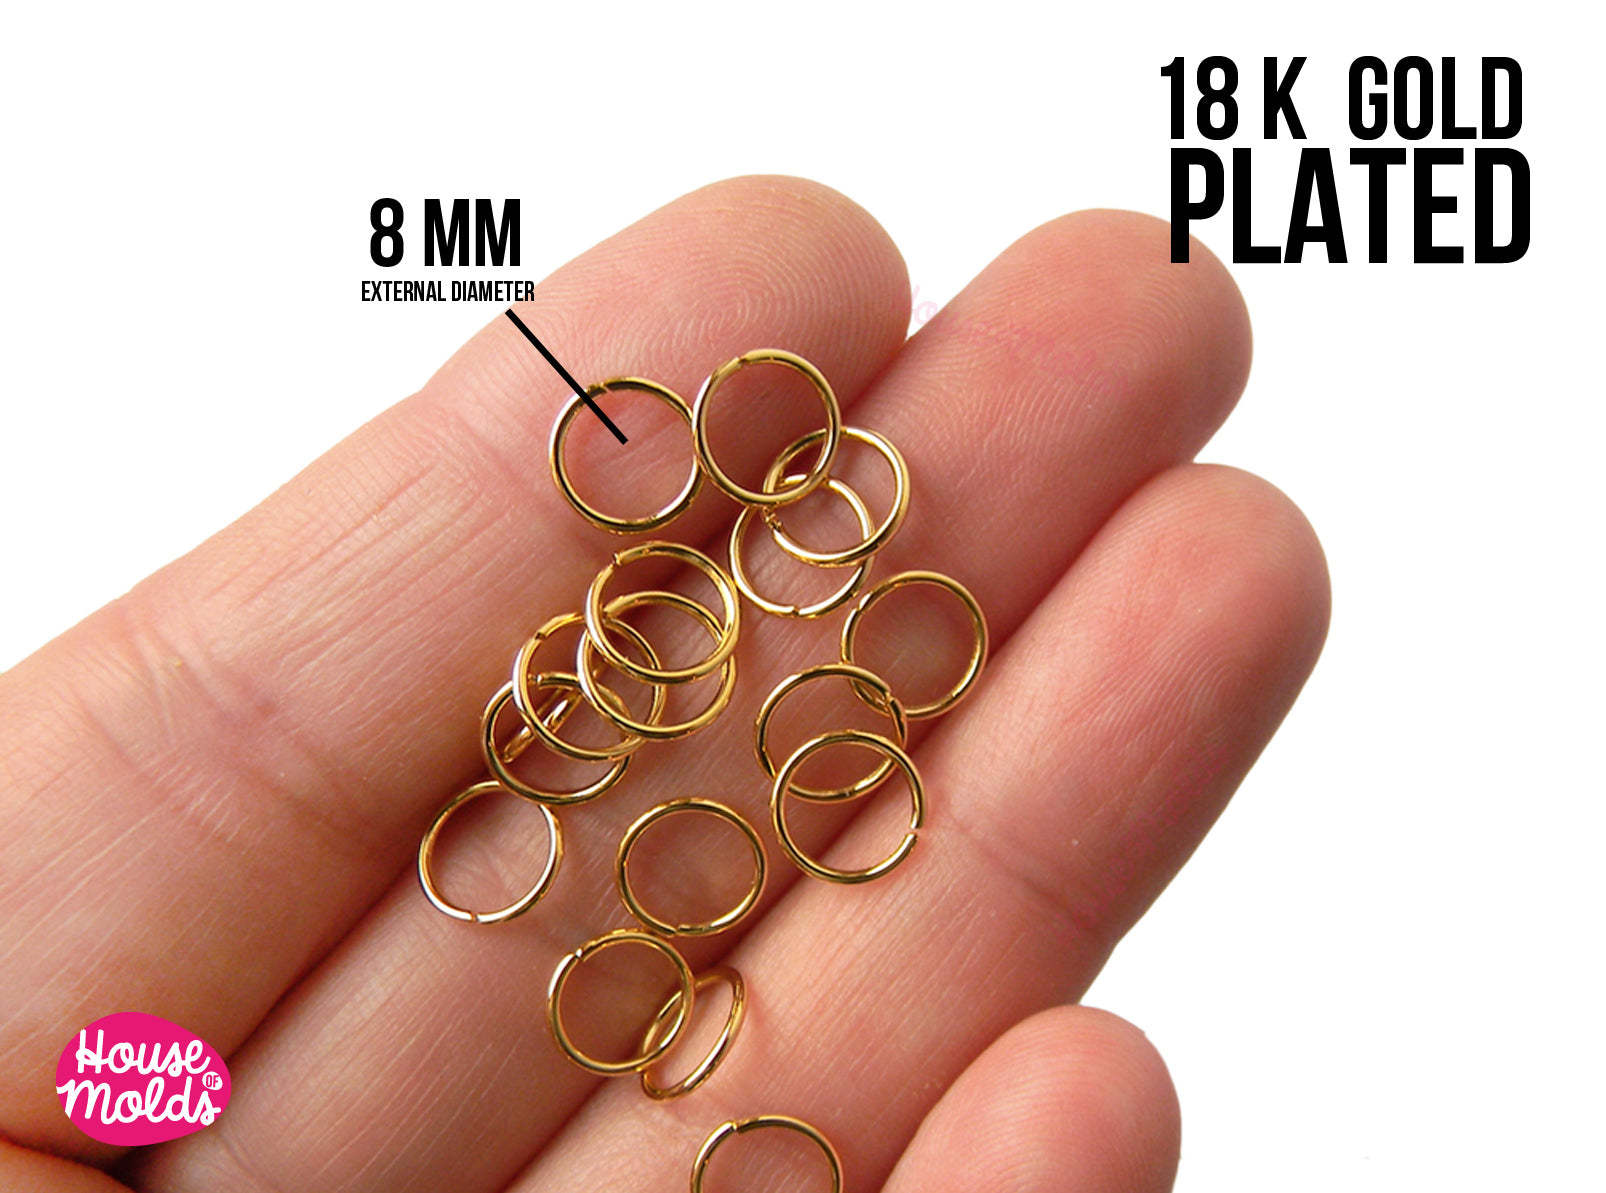 8mm Gold Plated Jump Rings 21 Gauge Iron Based Alloy - 100pcs 8mm